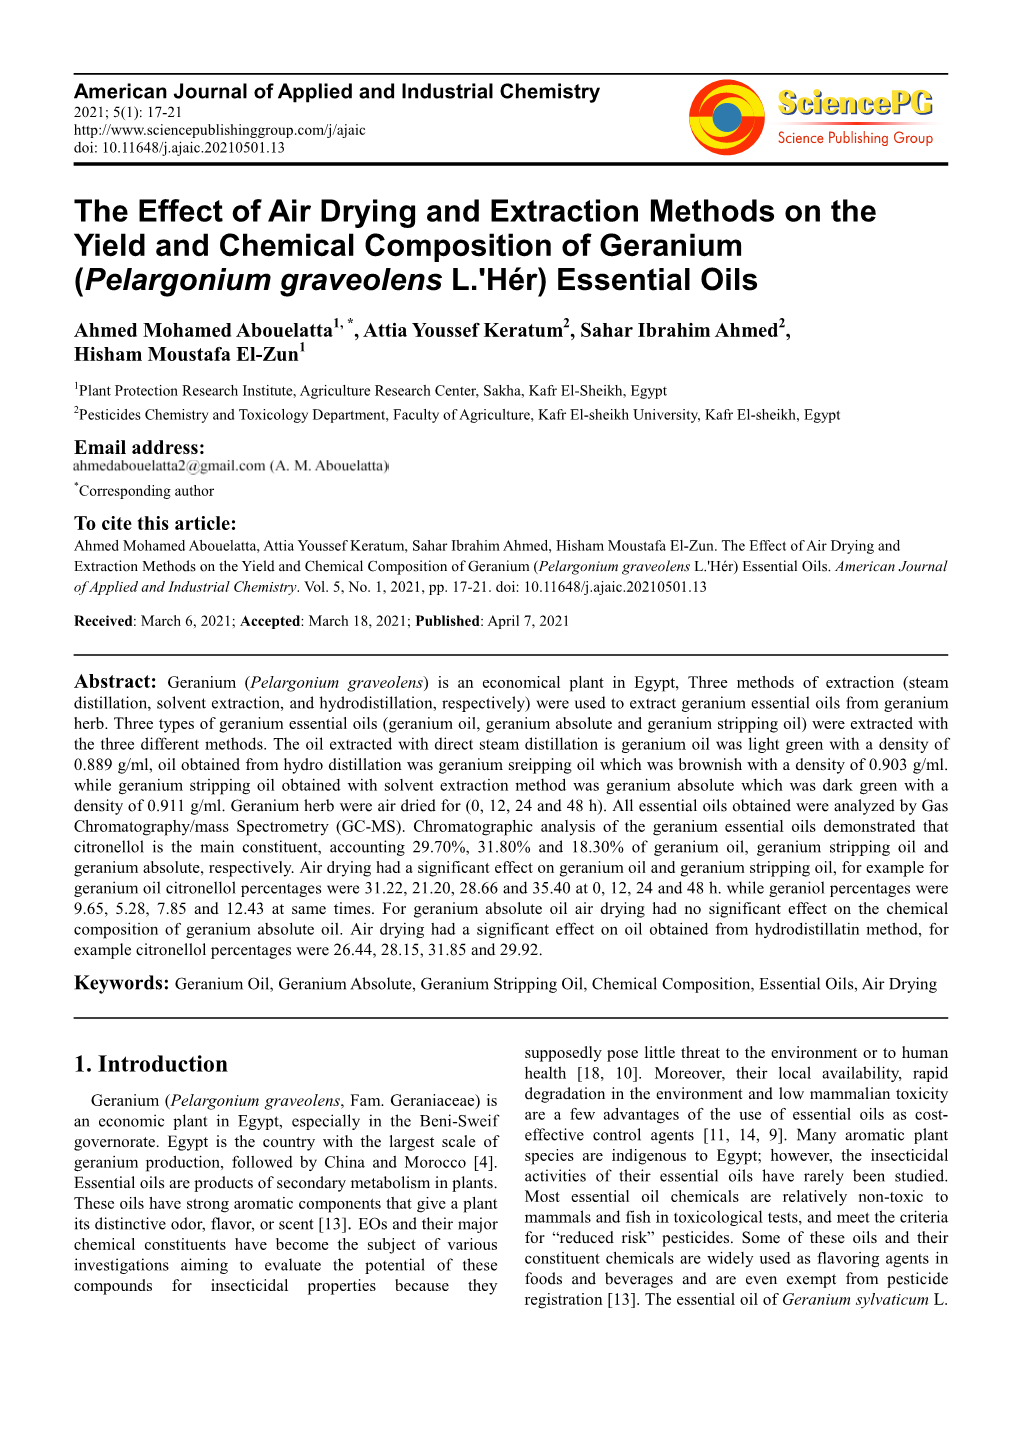 The Effect of Air Drying and Extraction Methods on the Yield and Chemical Composition of Geranium (Pelargonium Graveolens L.'Hér) Essential Oils